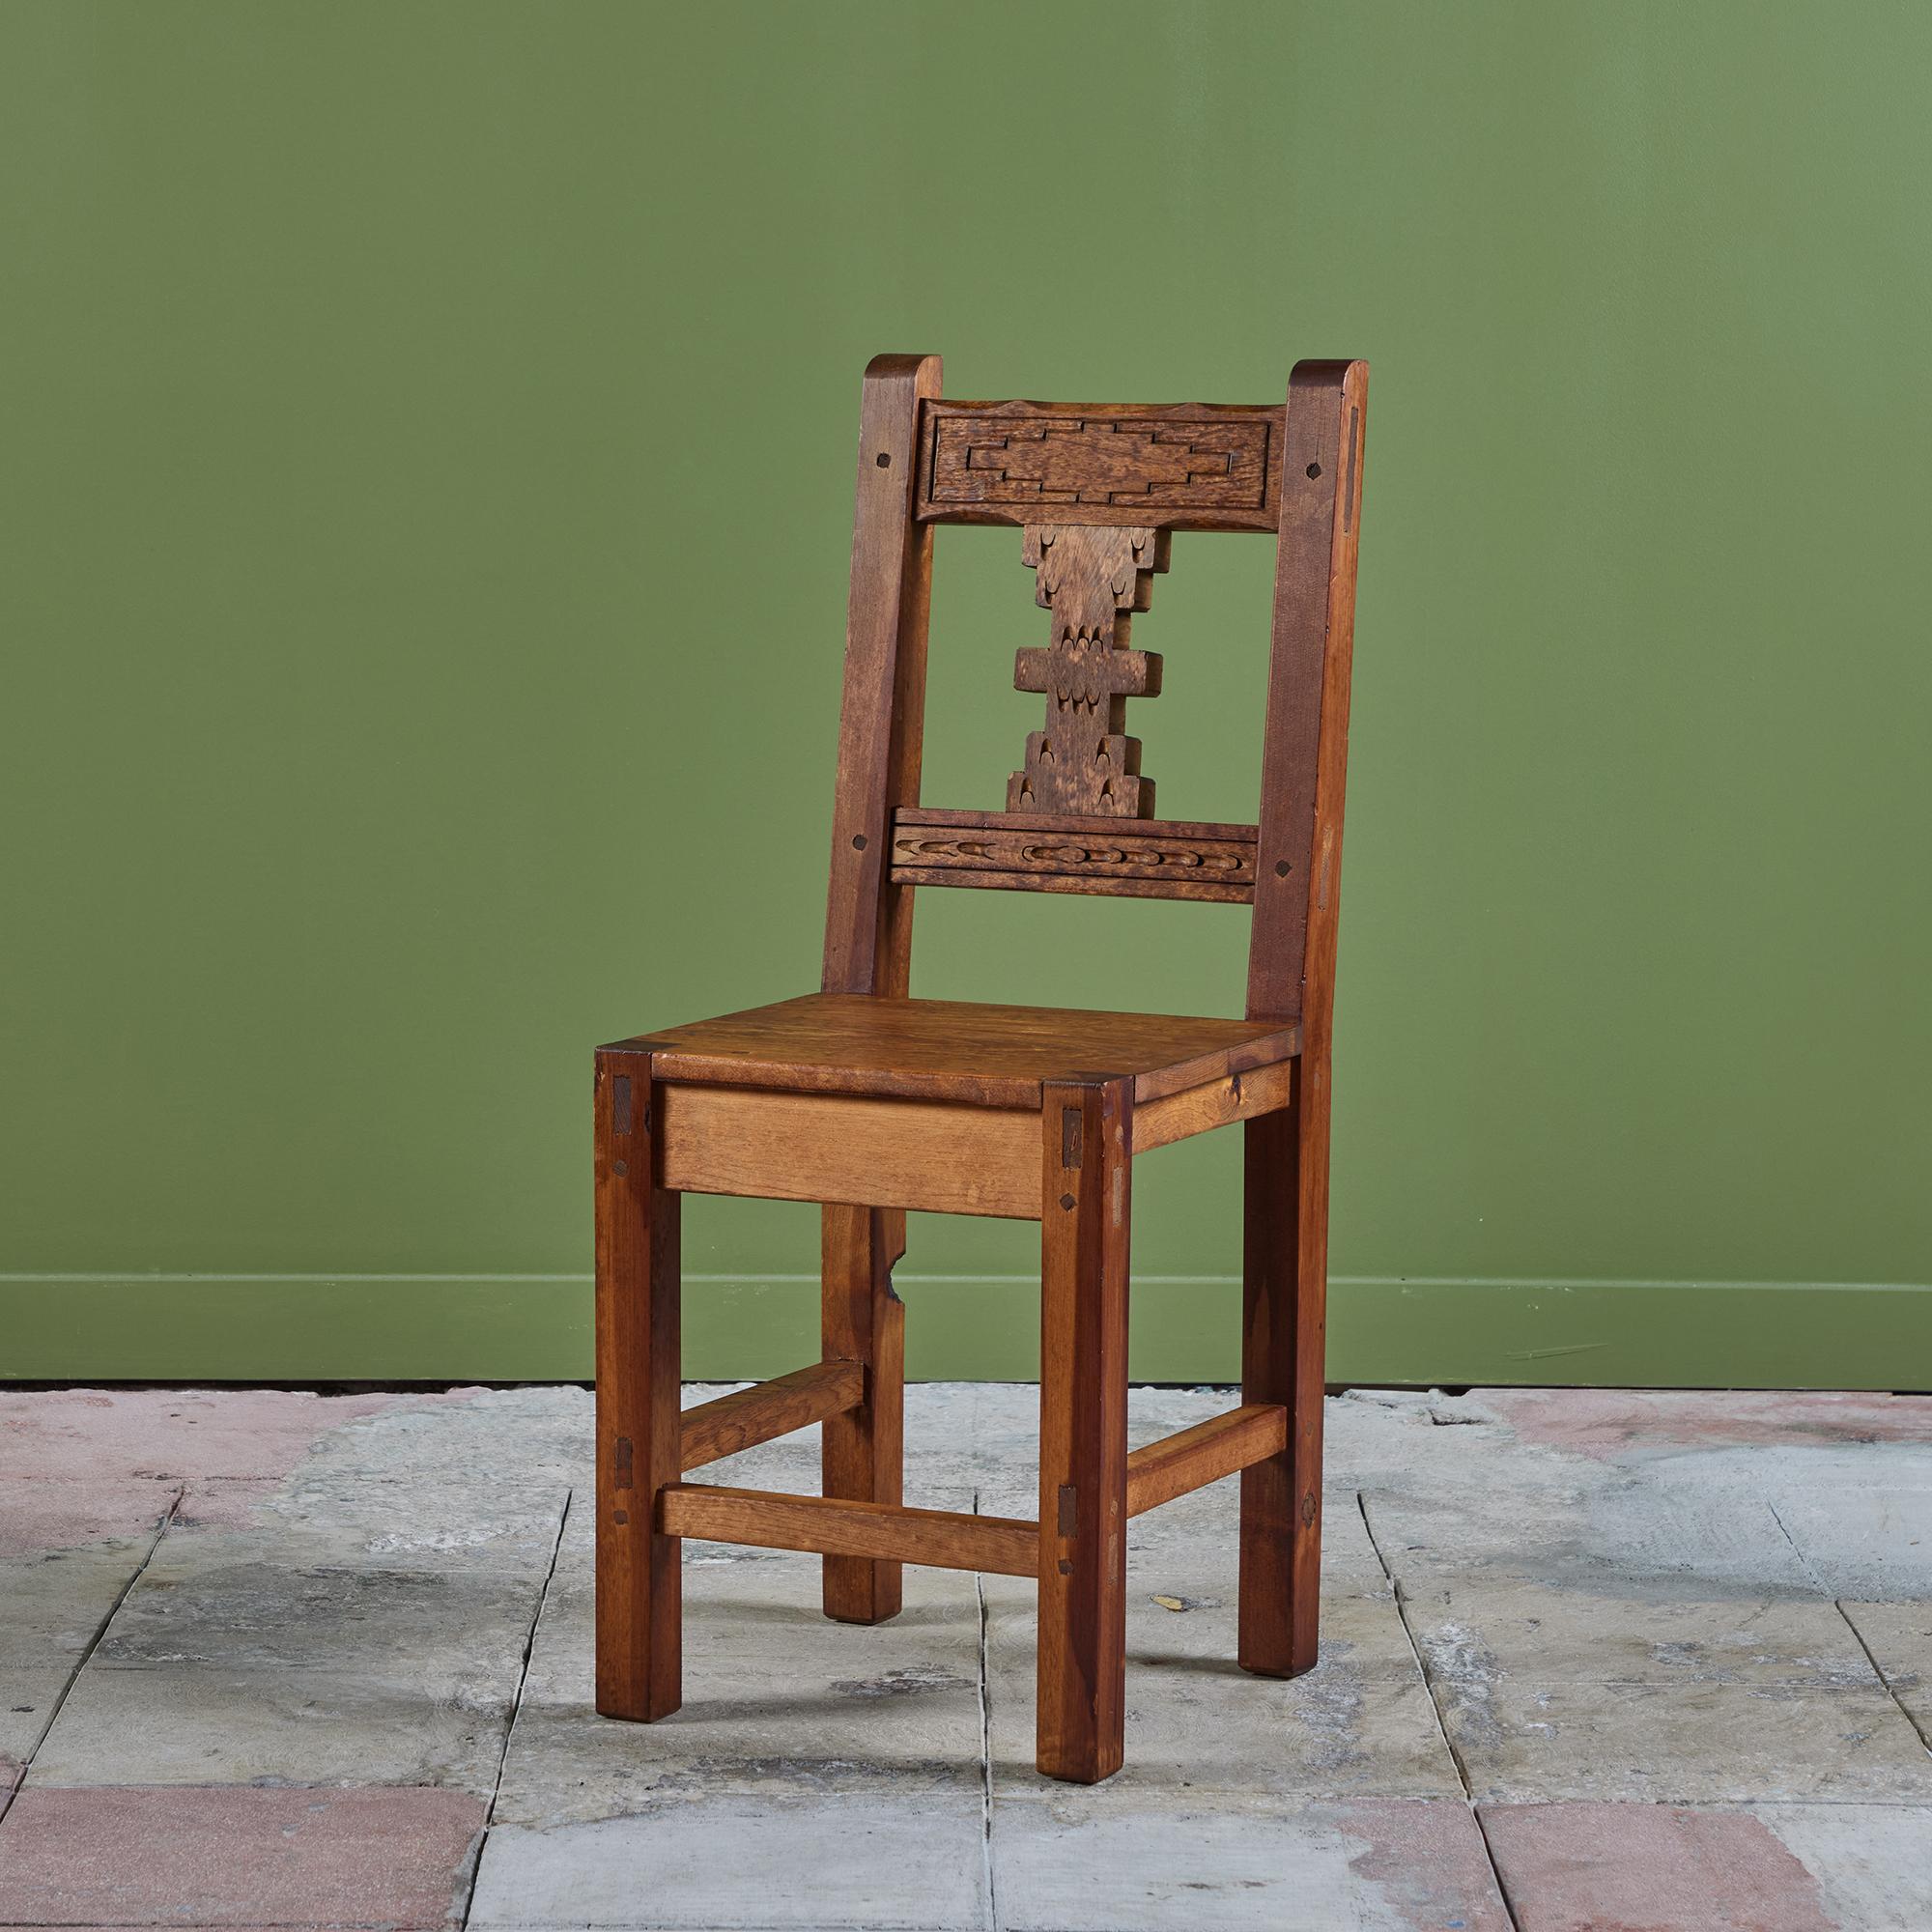 Hand carved Mexican modern side chair. The chair features a mahogany frame with a carved detailing along the front of the backrest. Perfect as an accent chair, desk chair or a set of dining chairs! We have five, please inquire about making a unique